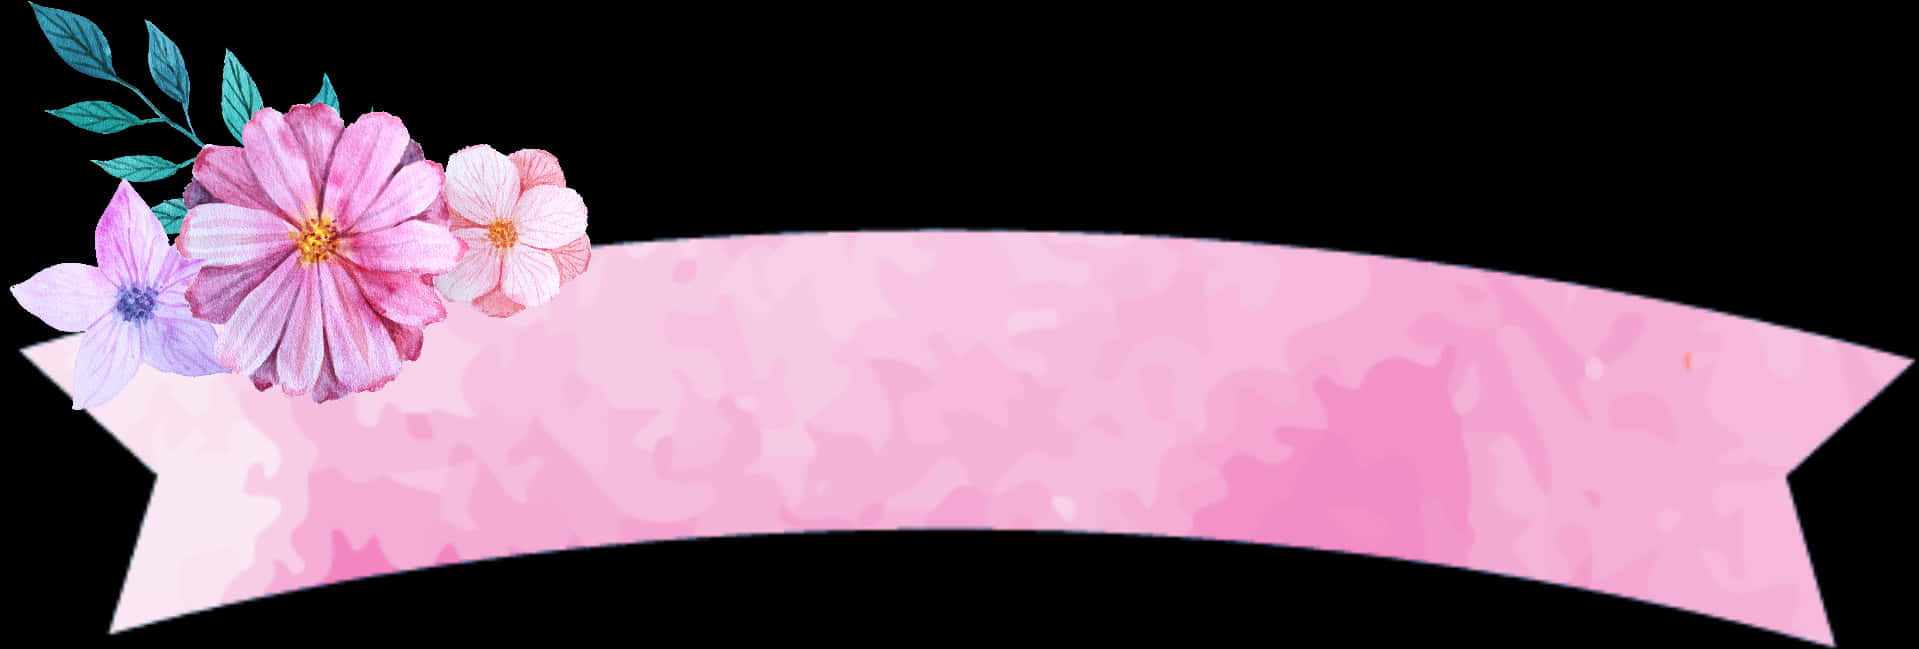 A Pink Rectangular Object With A Black Background